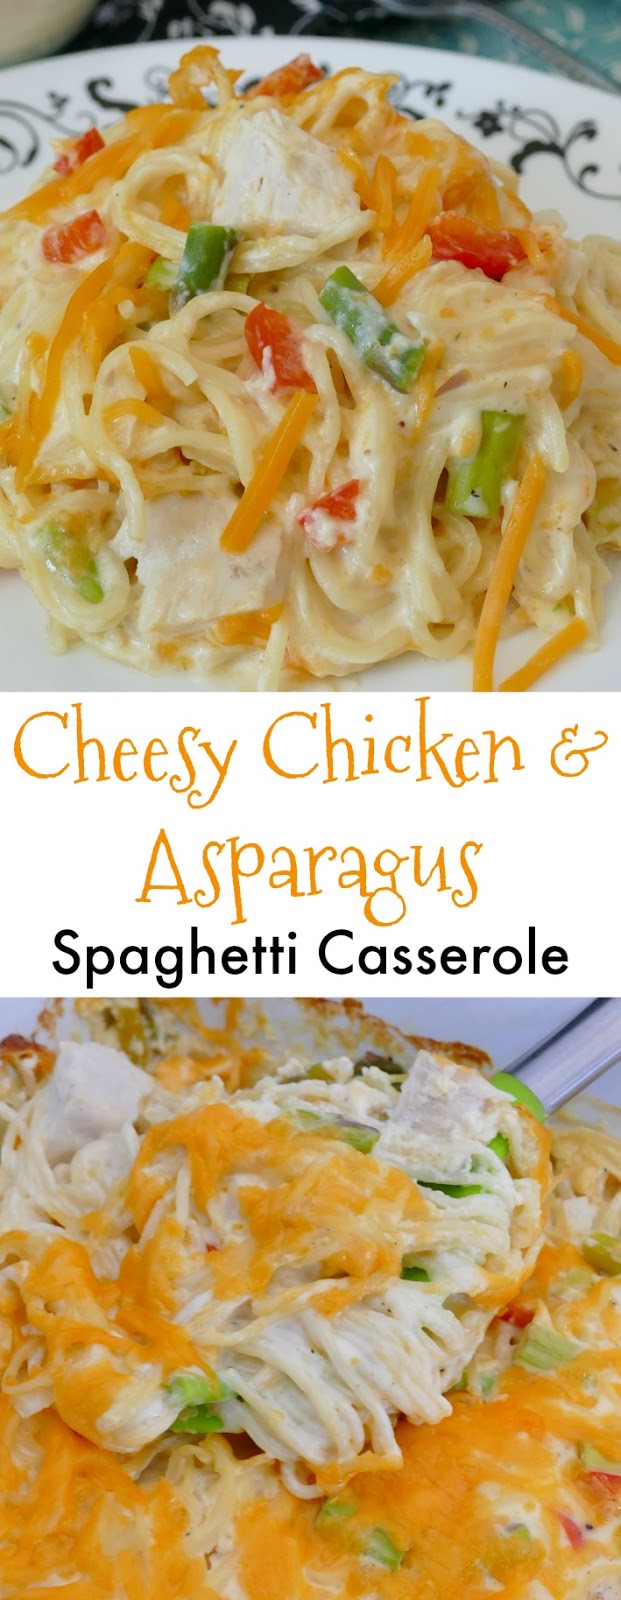 Cheesy Chicken and Asparagus Spaghetti Casserole Recipe! This creamy angel hair pasta bake is a great way to use leftover rotisserie chicken! It's budget friendly and the whole family will love it! 